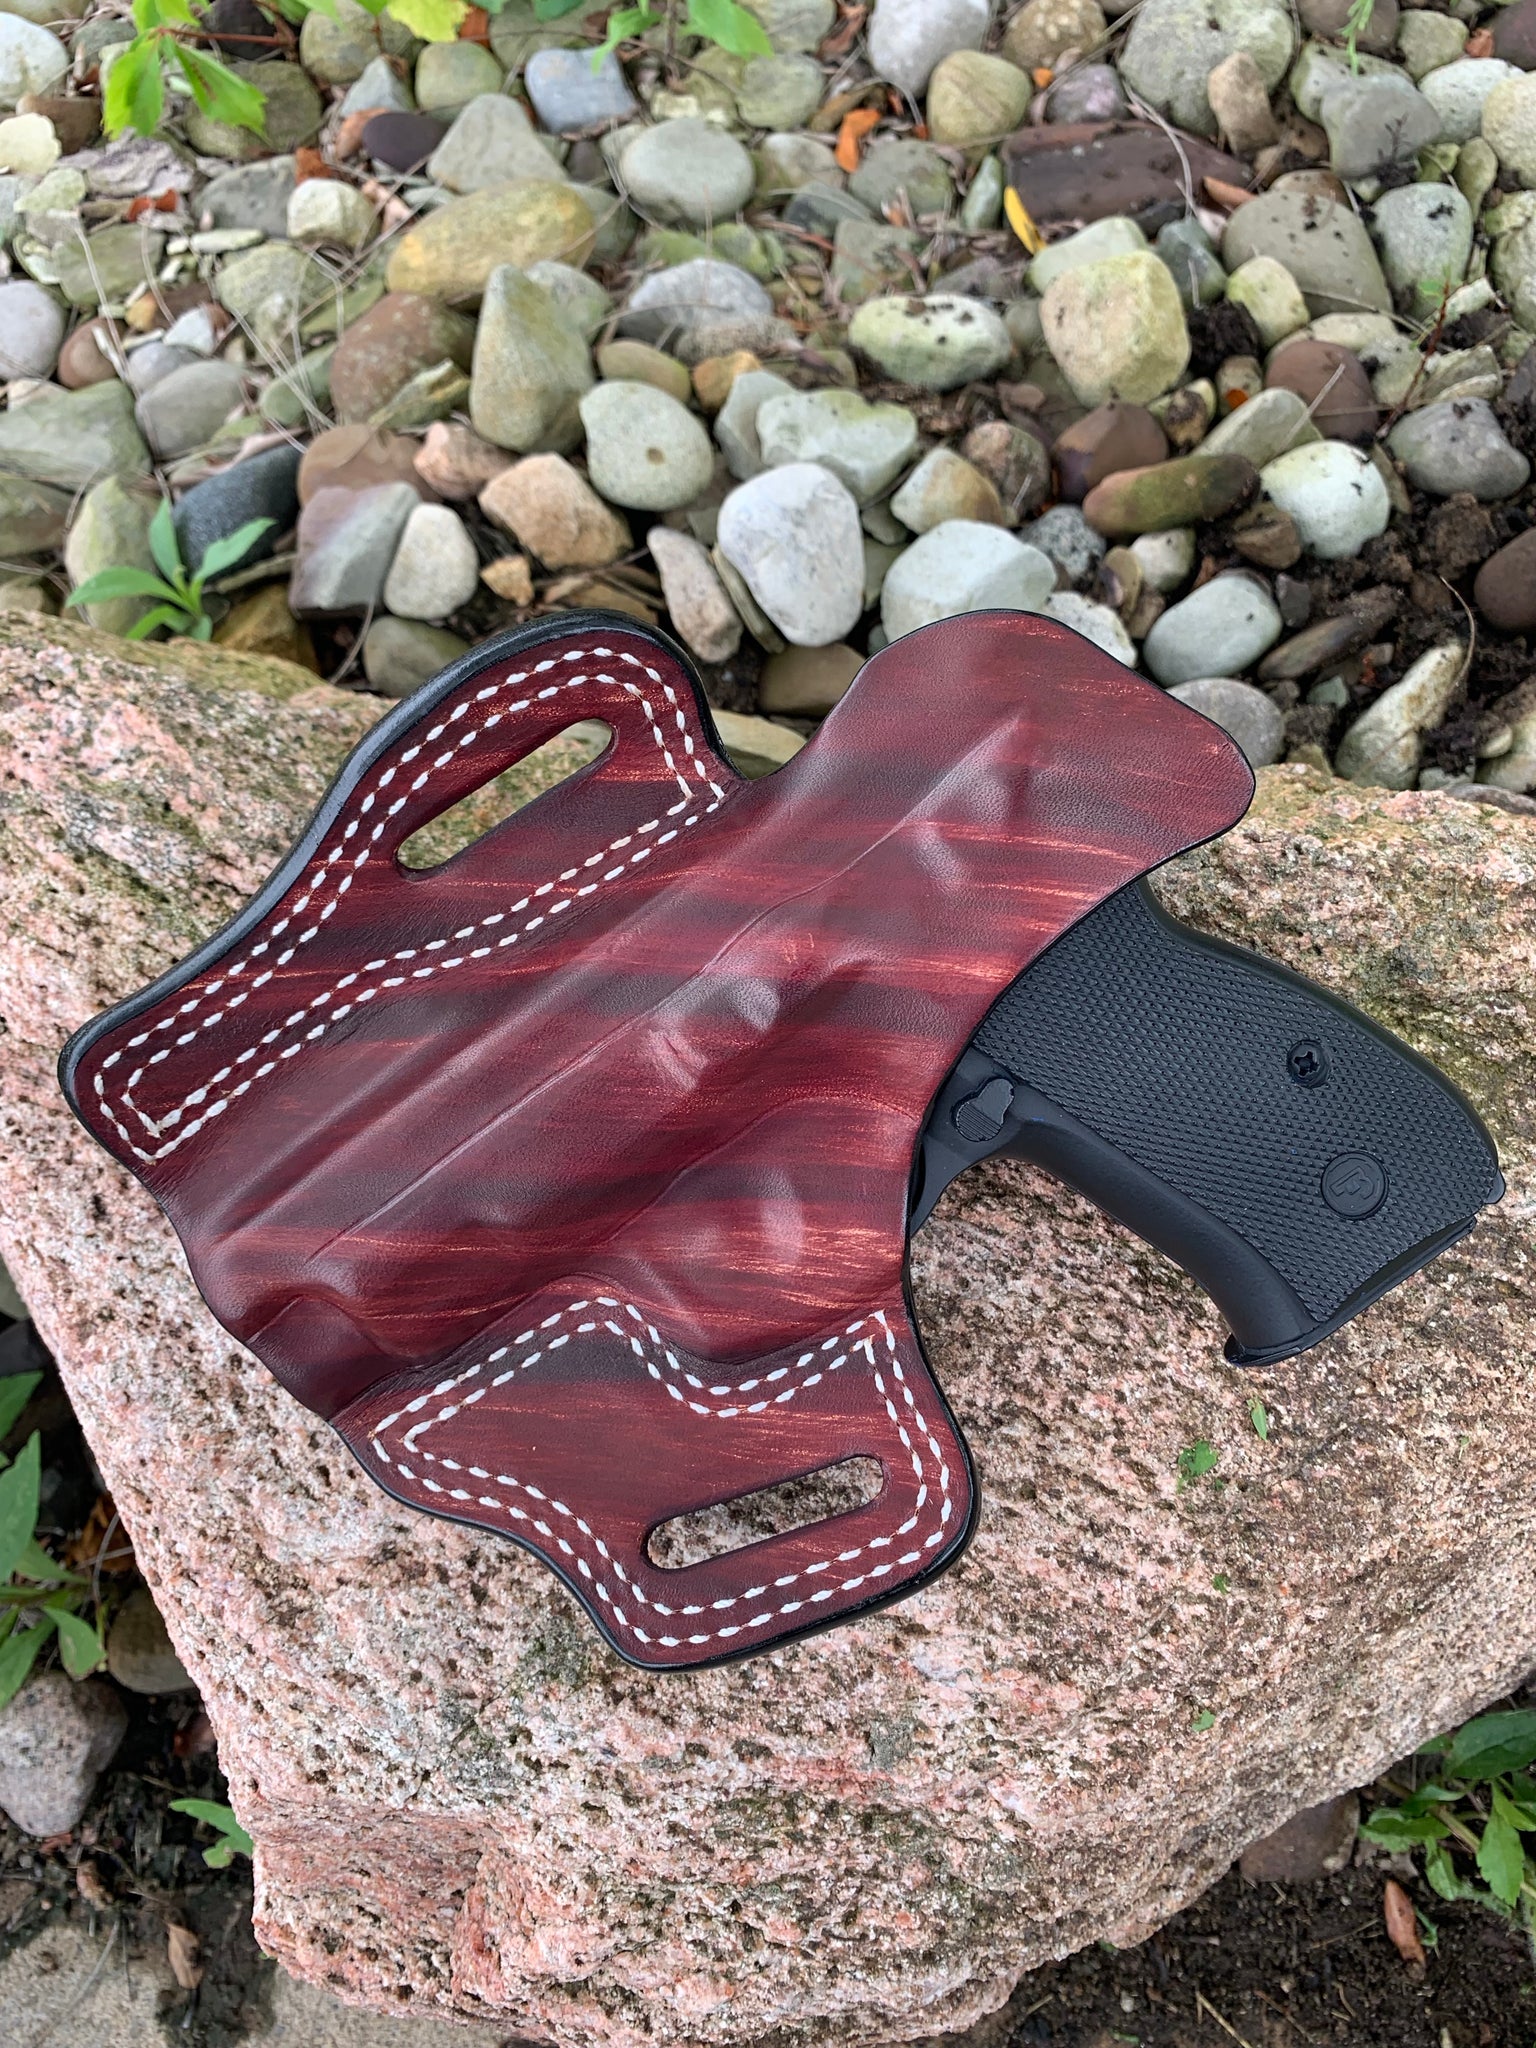 CZ 75 D PCR COMPACT OWB HOLSTER